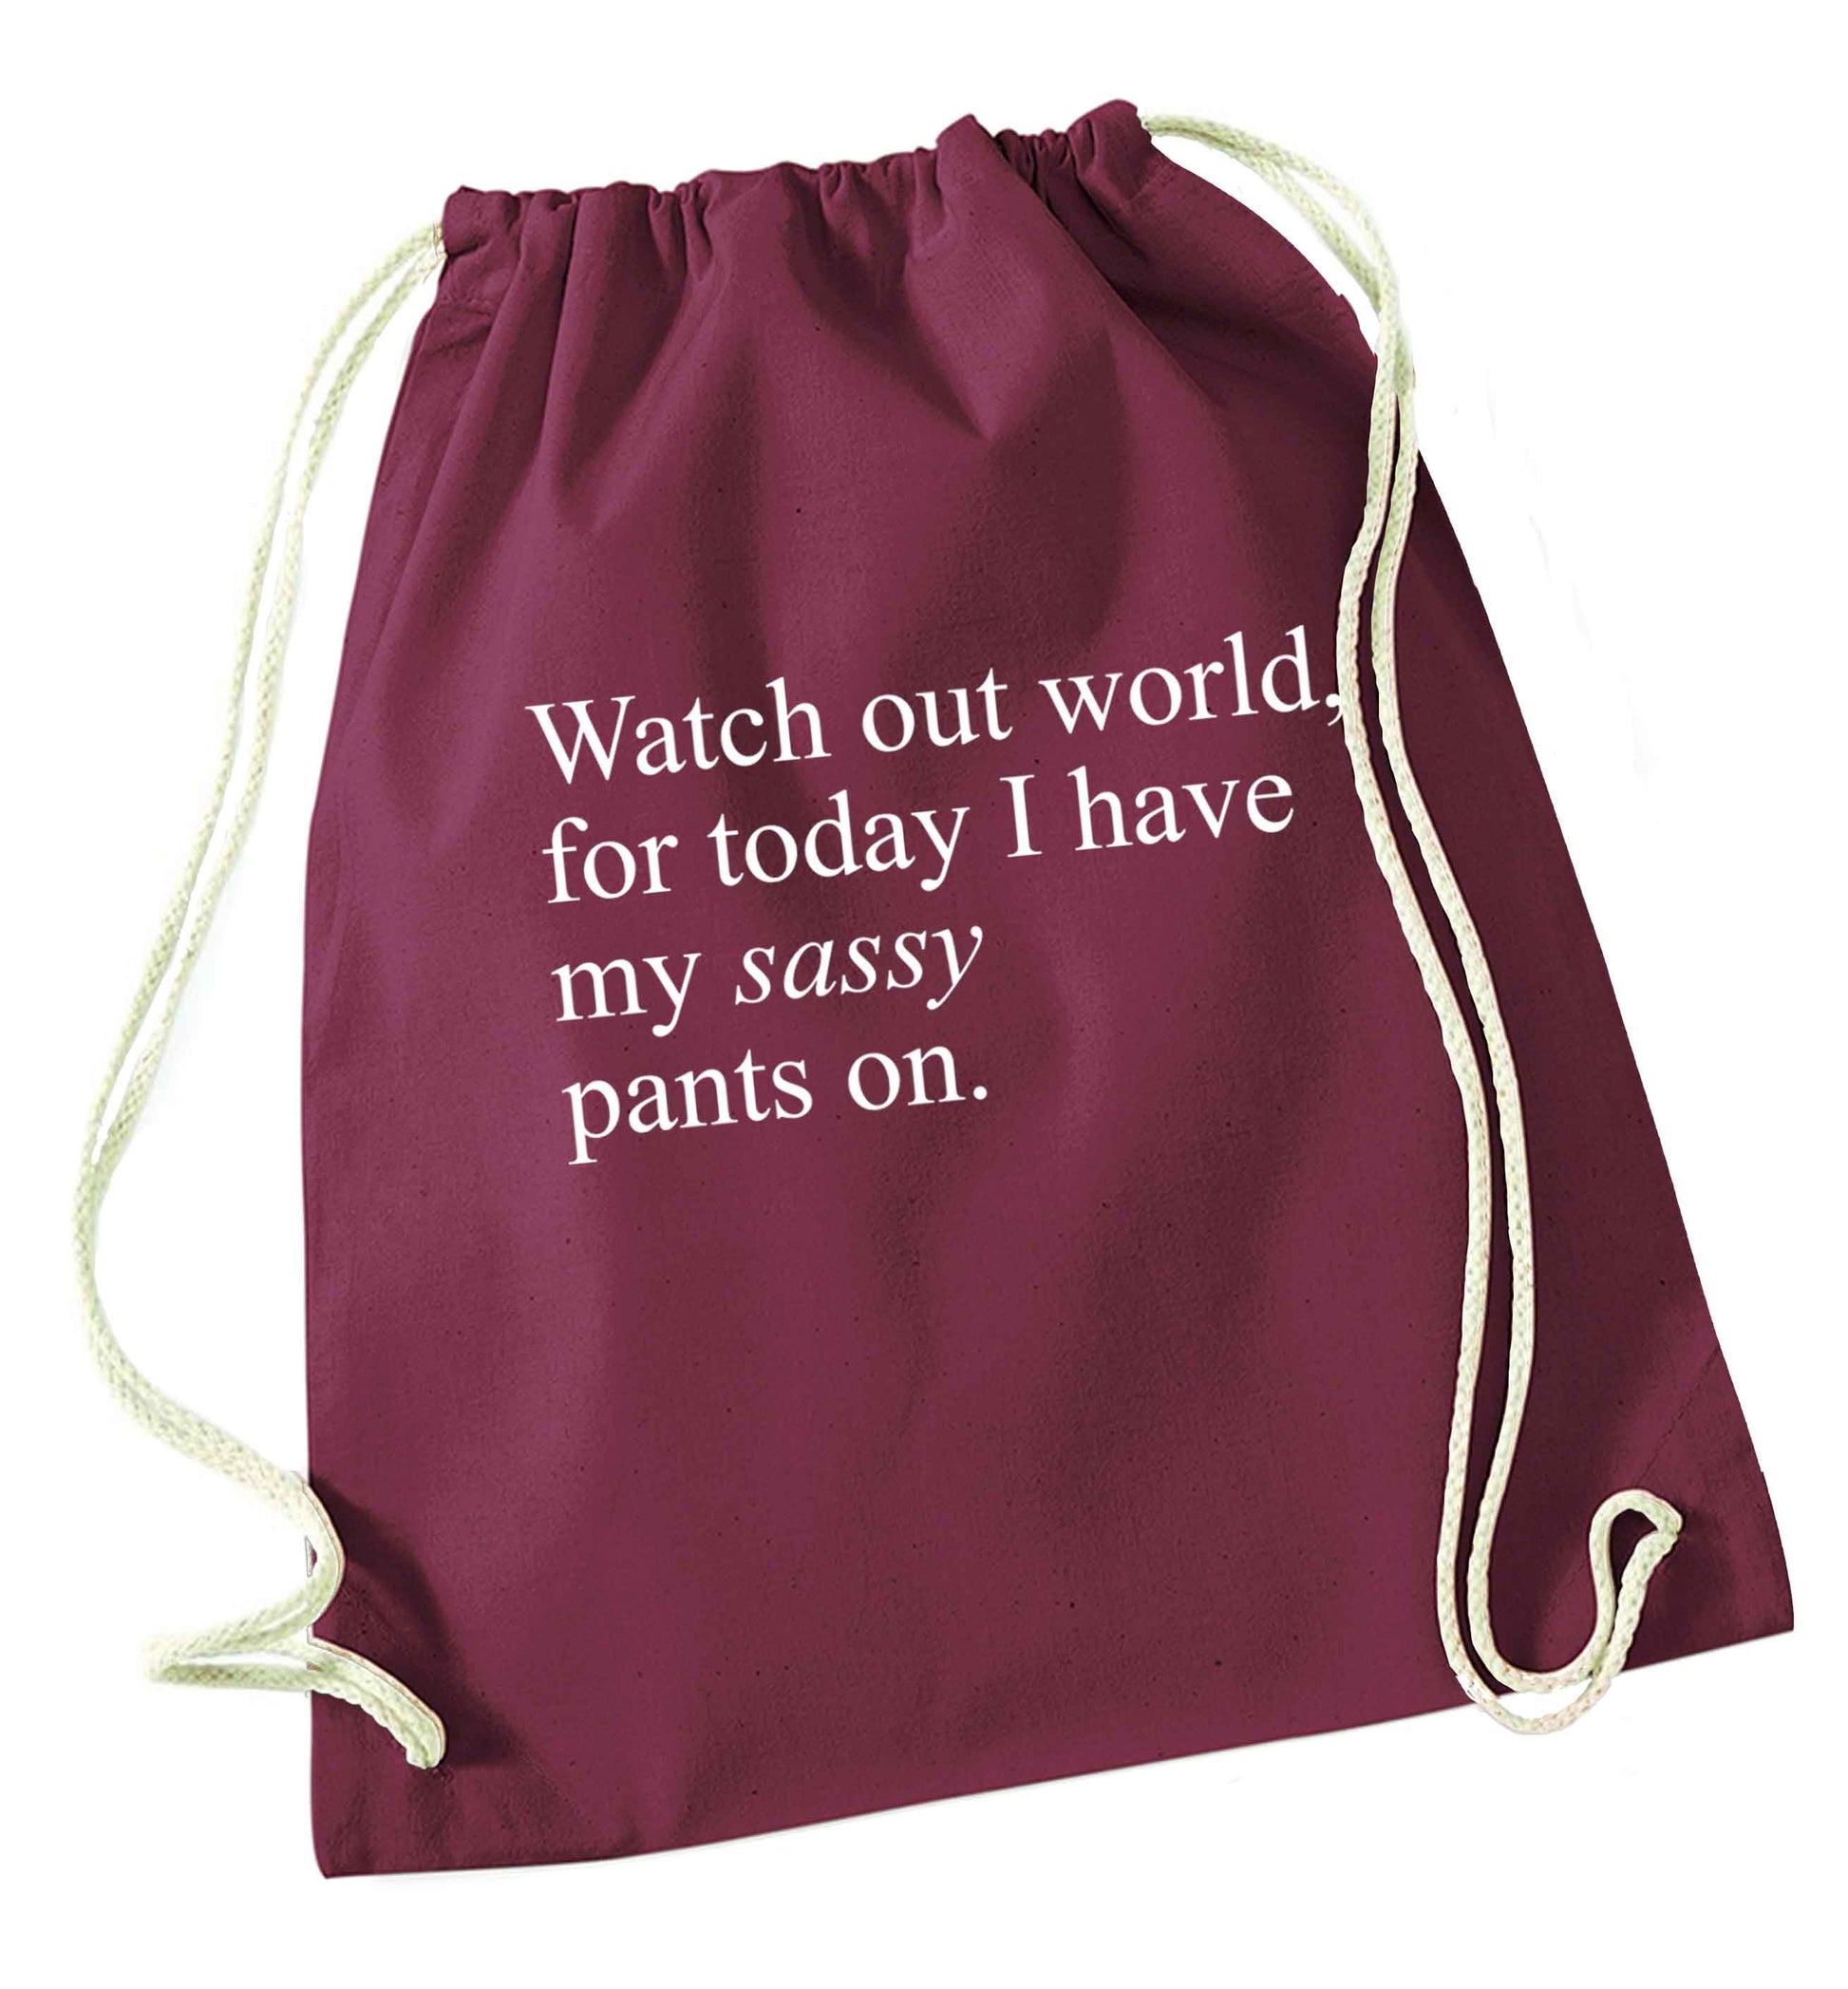 Watch out world for today I have my sassy pants on maroon drawstring bag